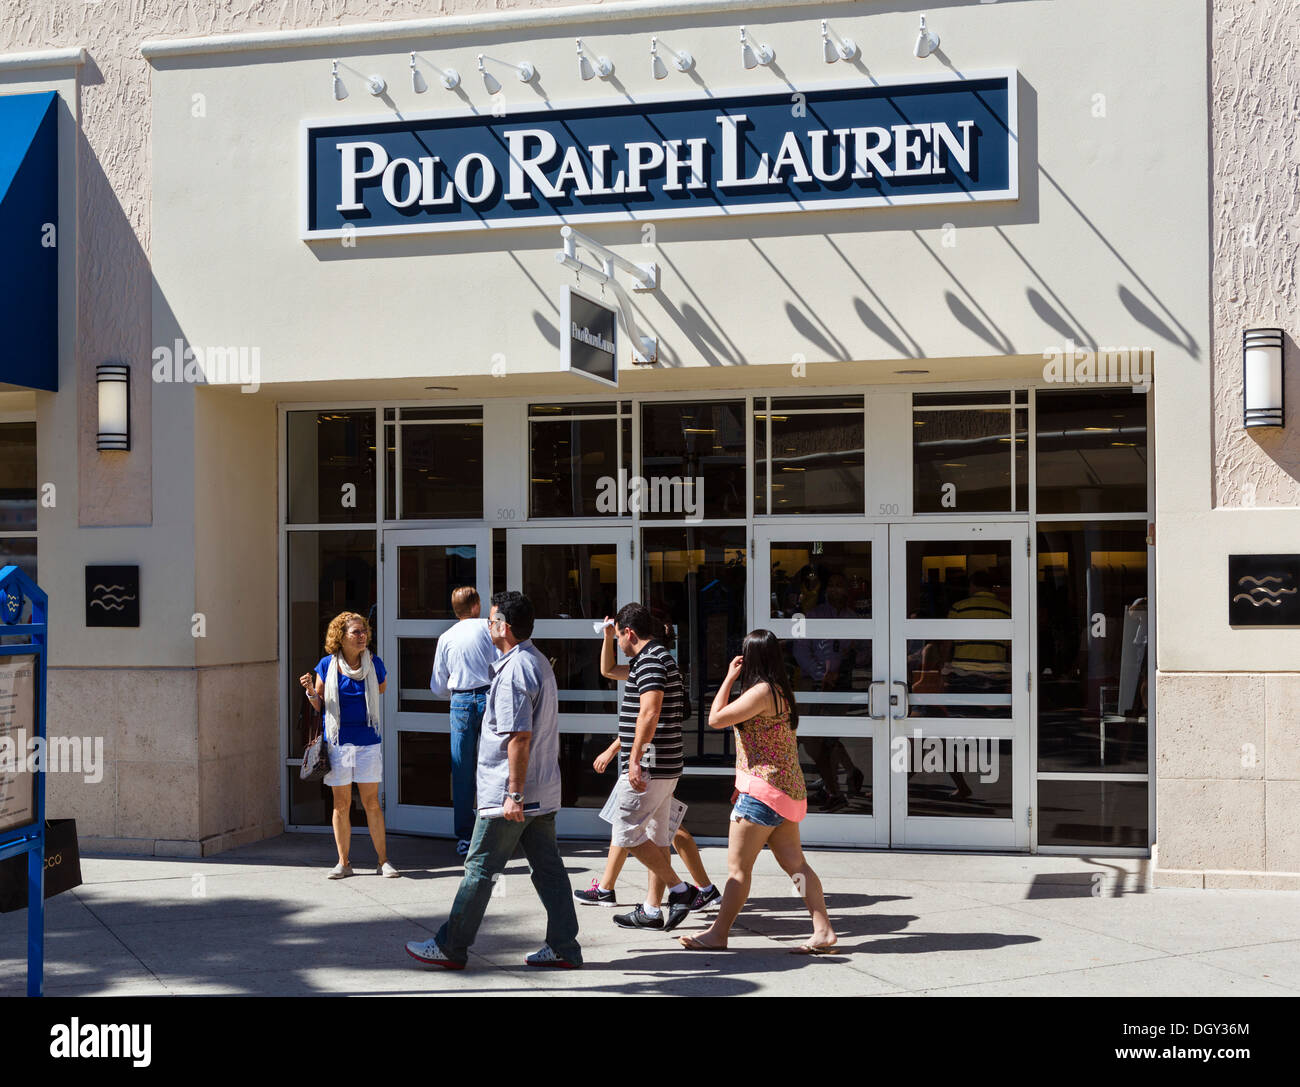 Buy polo ralph lauren outlet - 65% OFF!